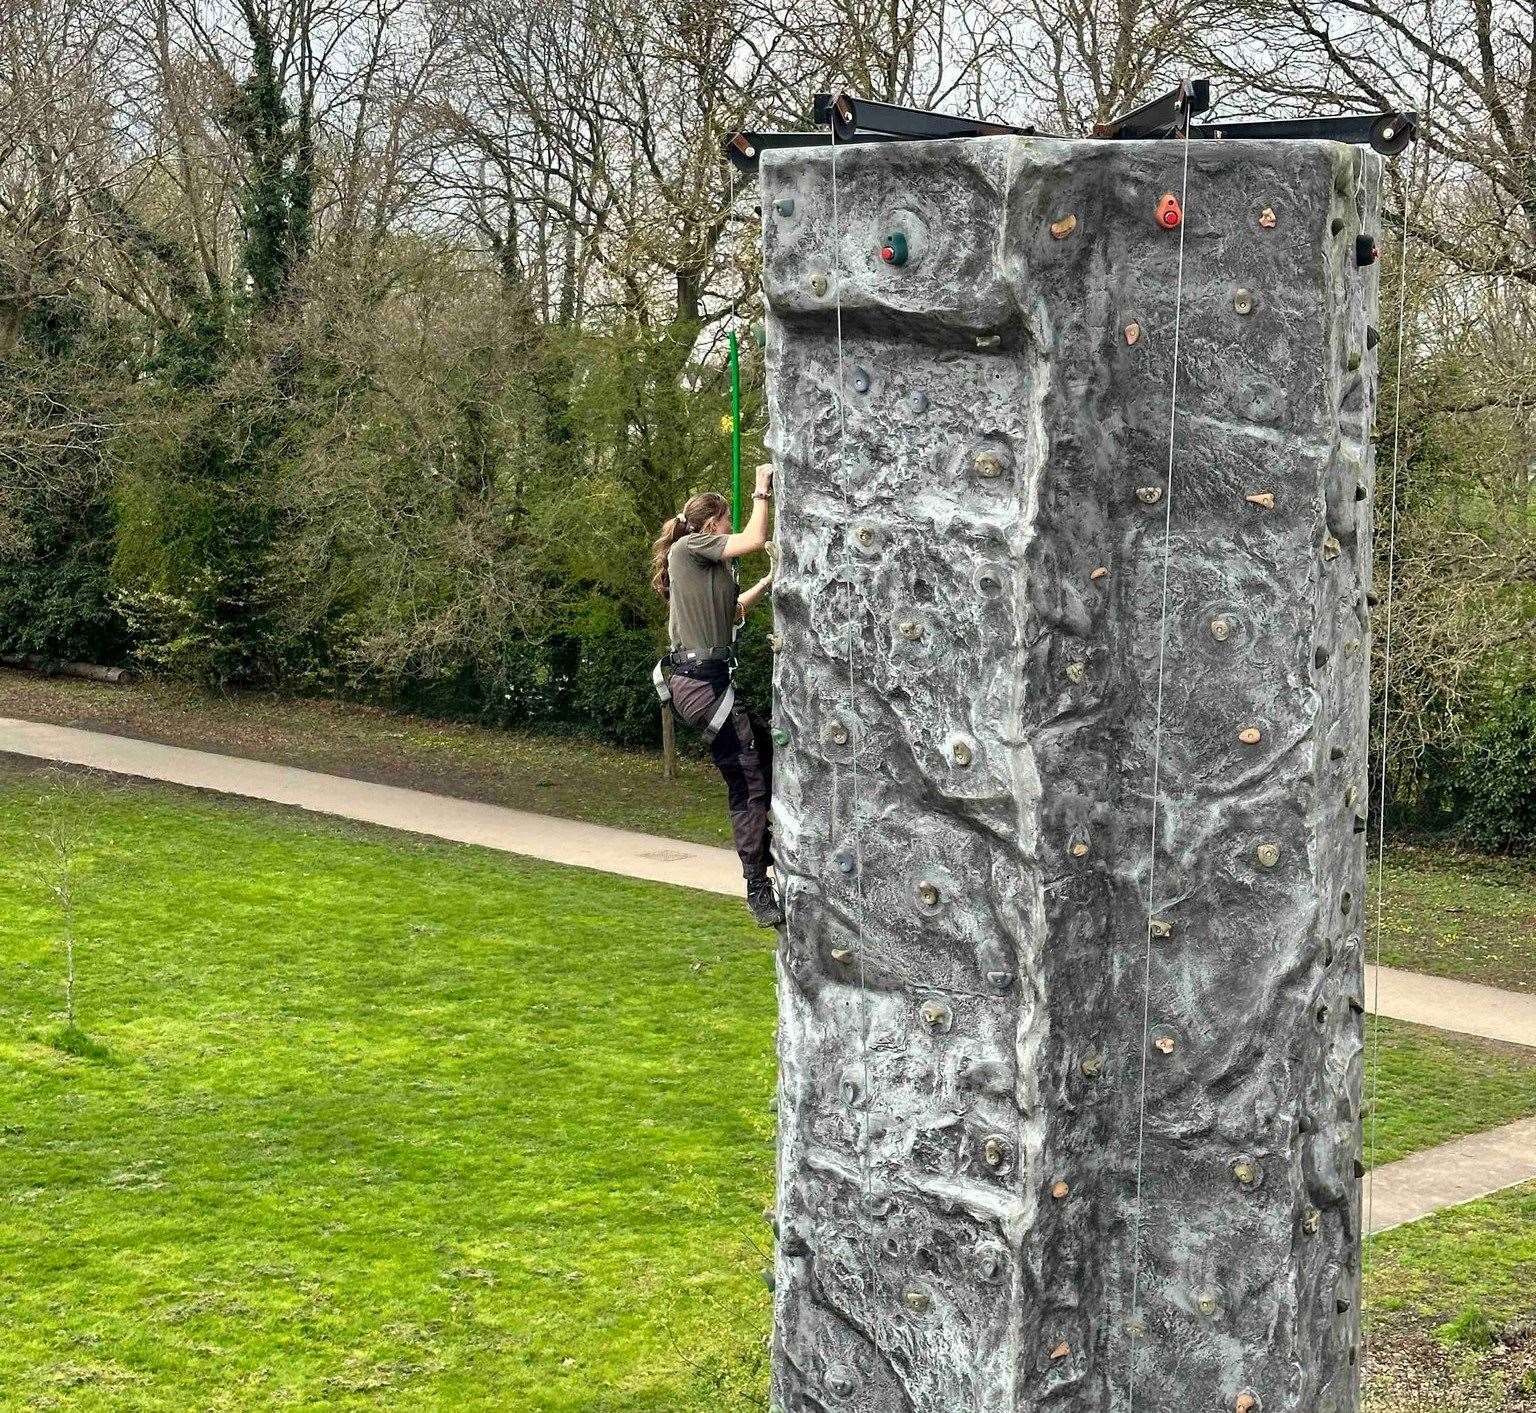 The refurb will affect the opening of the Climbing Wall. Picture: Mote Park Outdoor Adventure Facebook